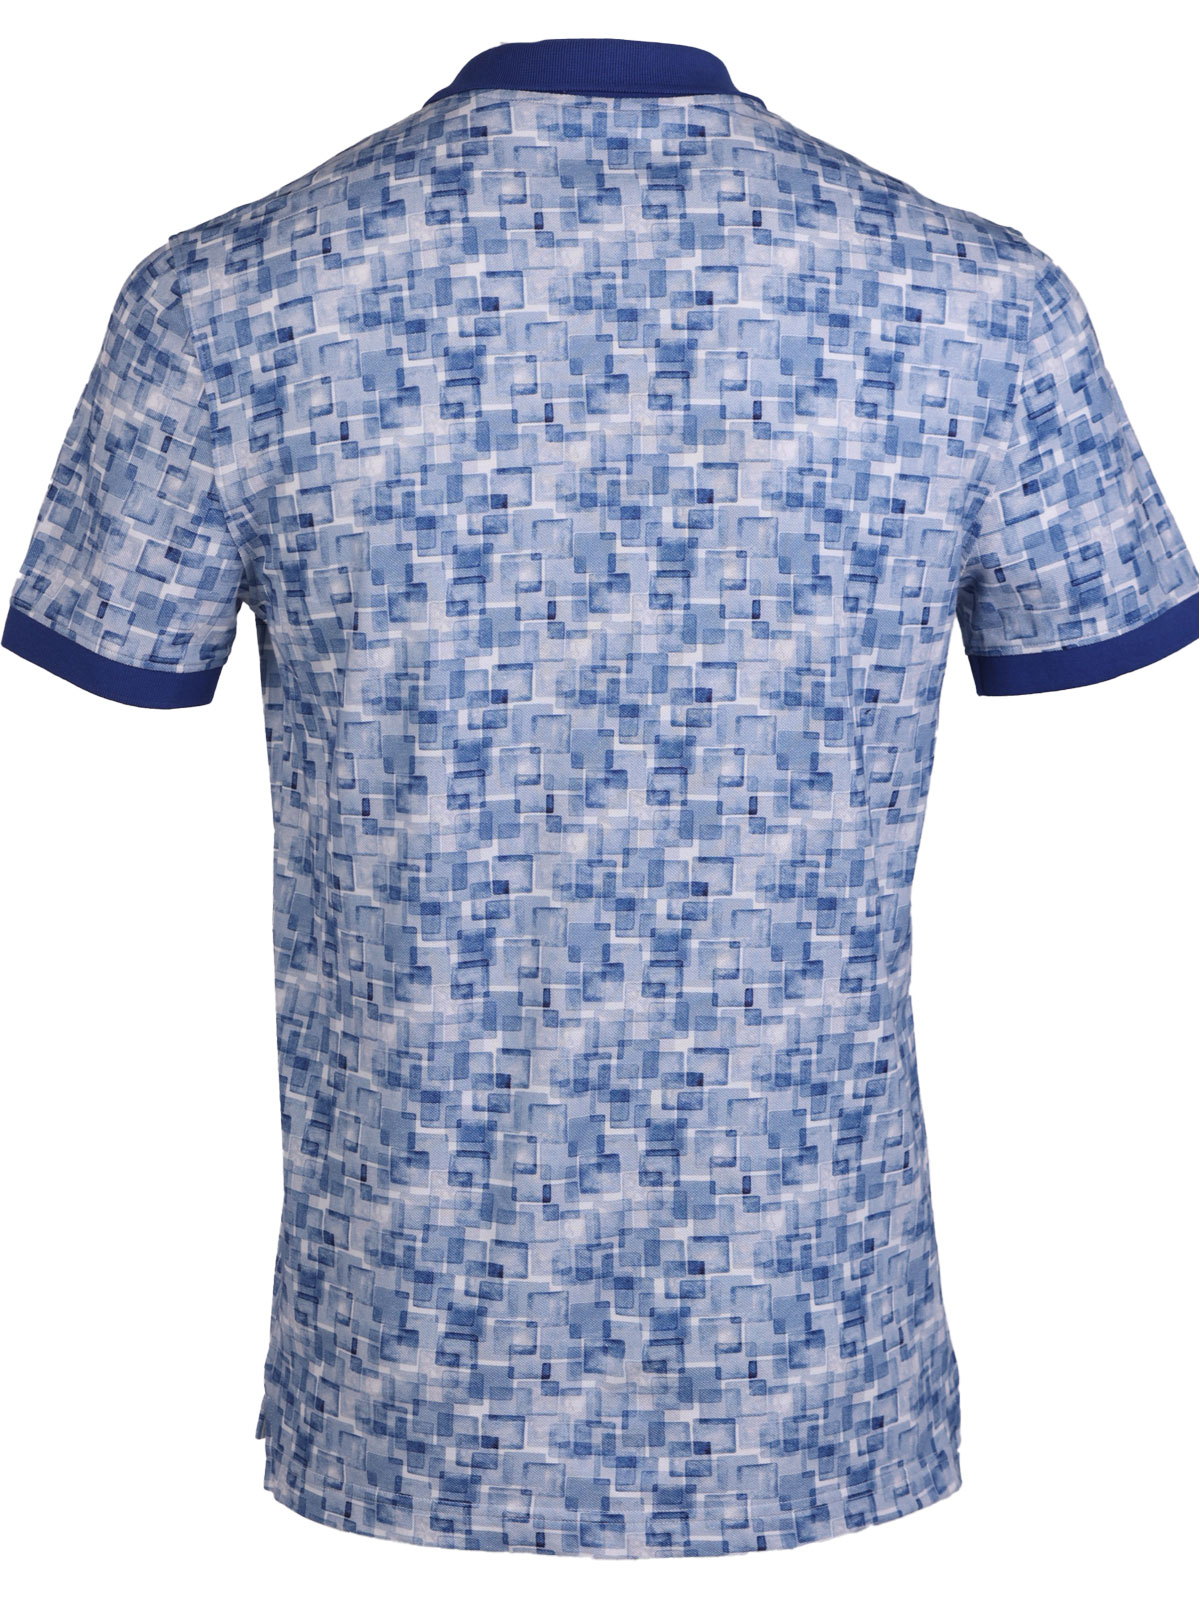 Tshirt in blue with figures - 93450 € 42.74 img2